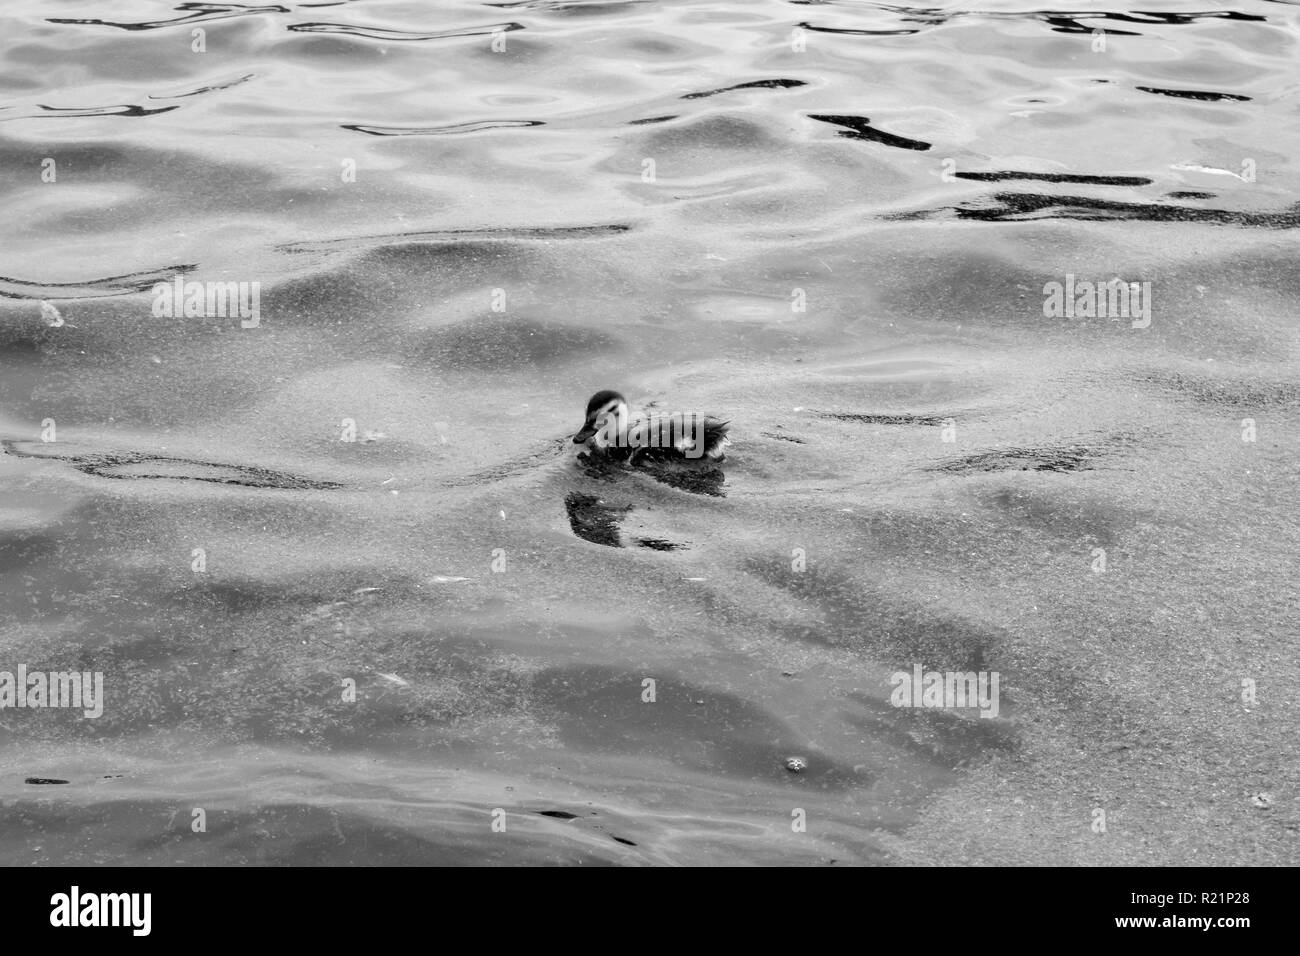 Duckling swimming in polluted water Stock Photo